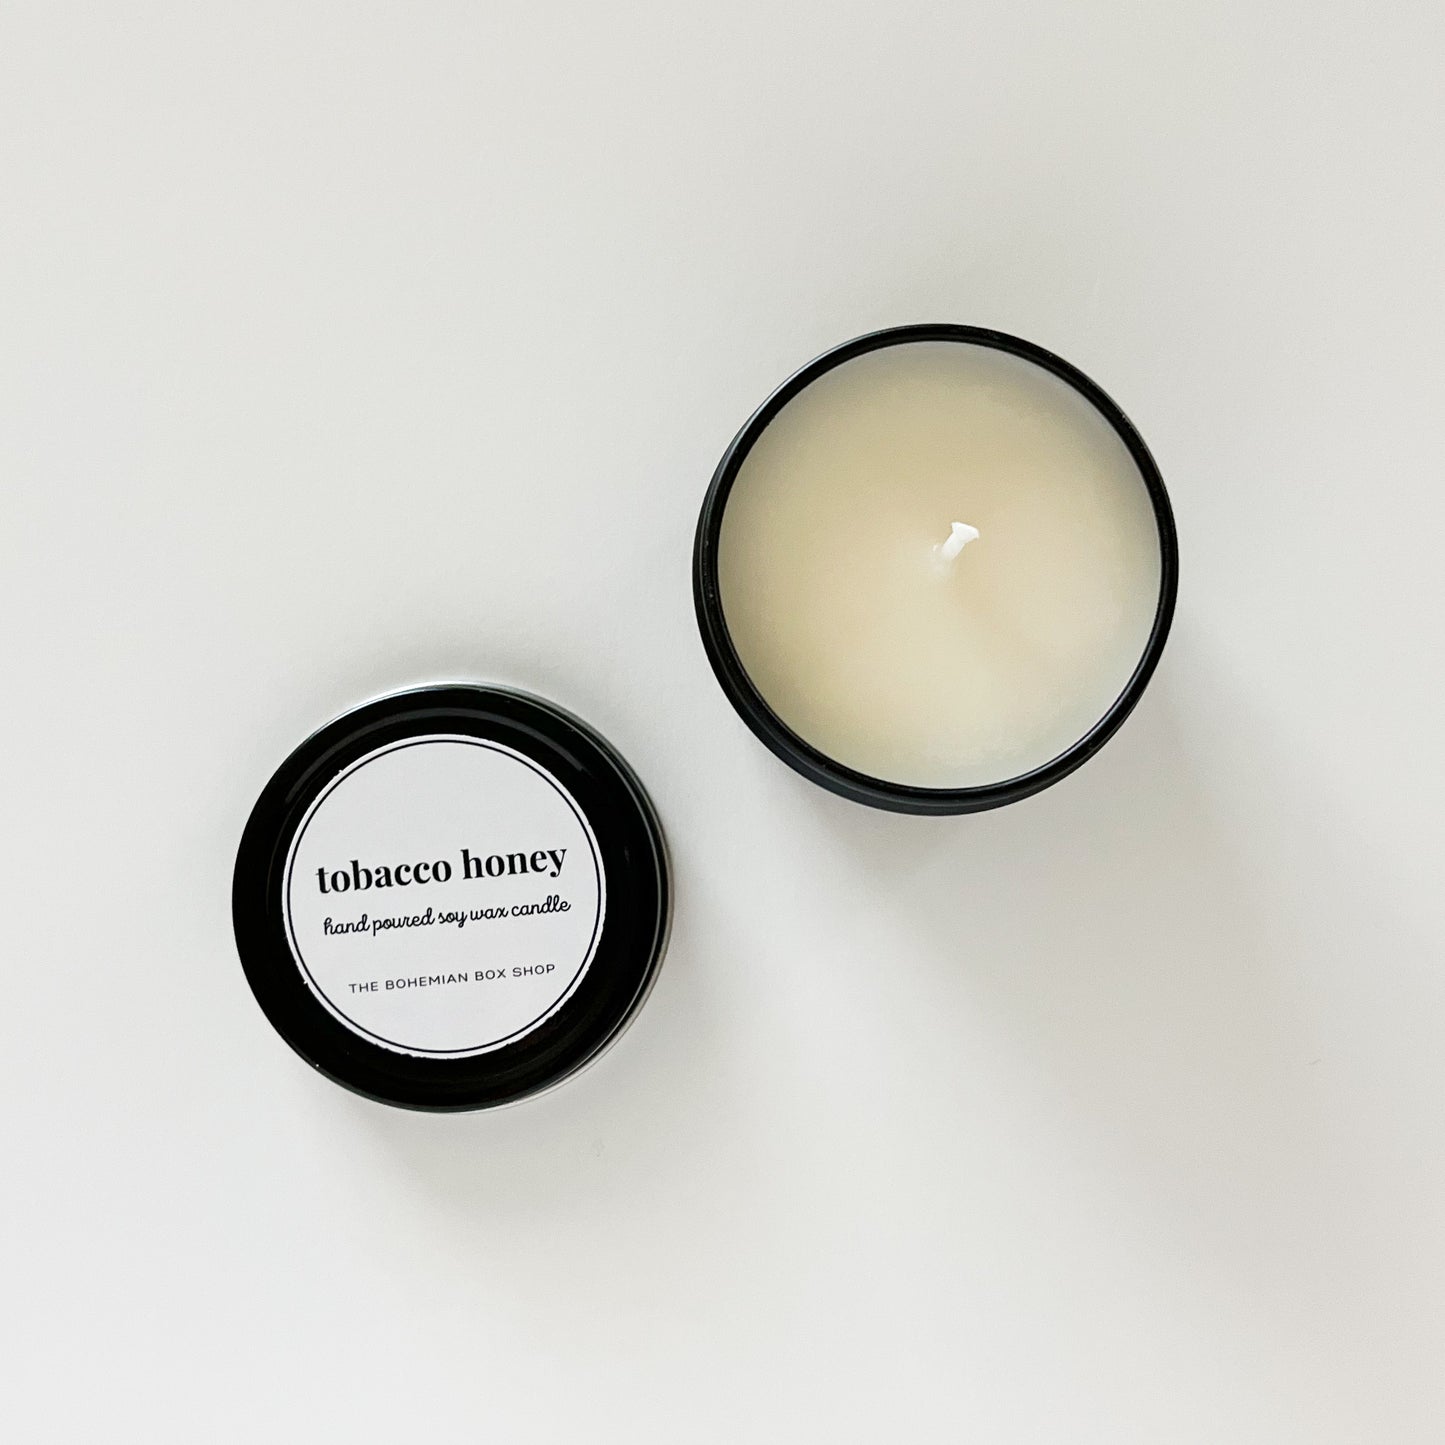 Tobacco honey soy candle